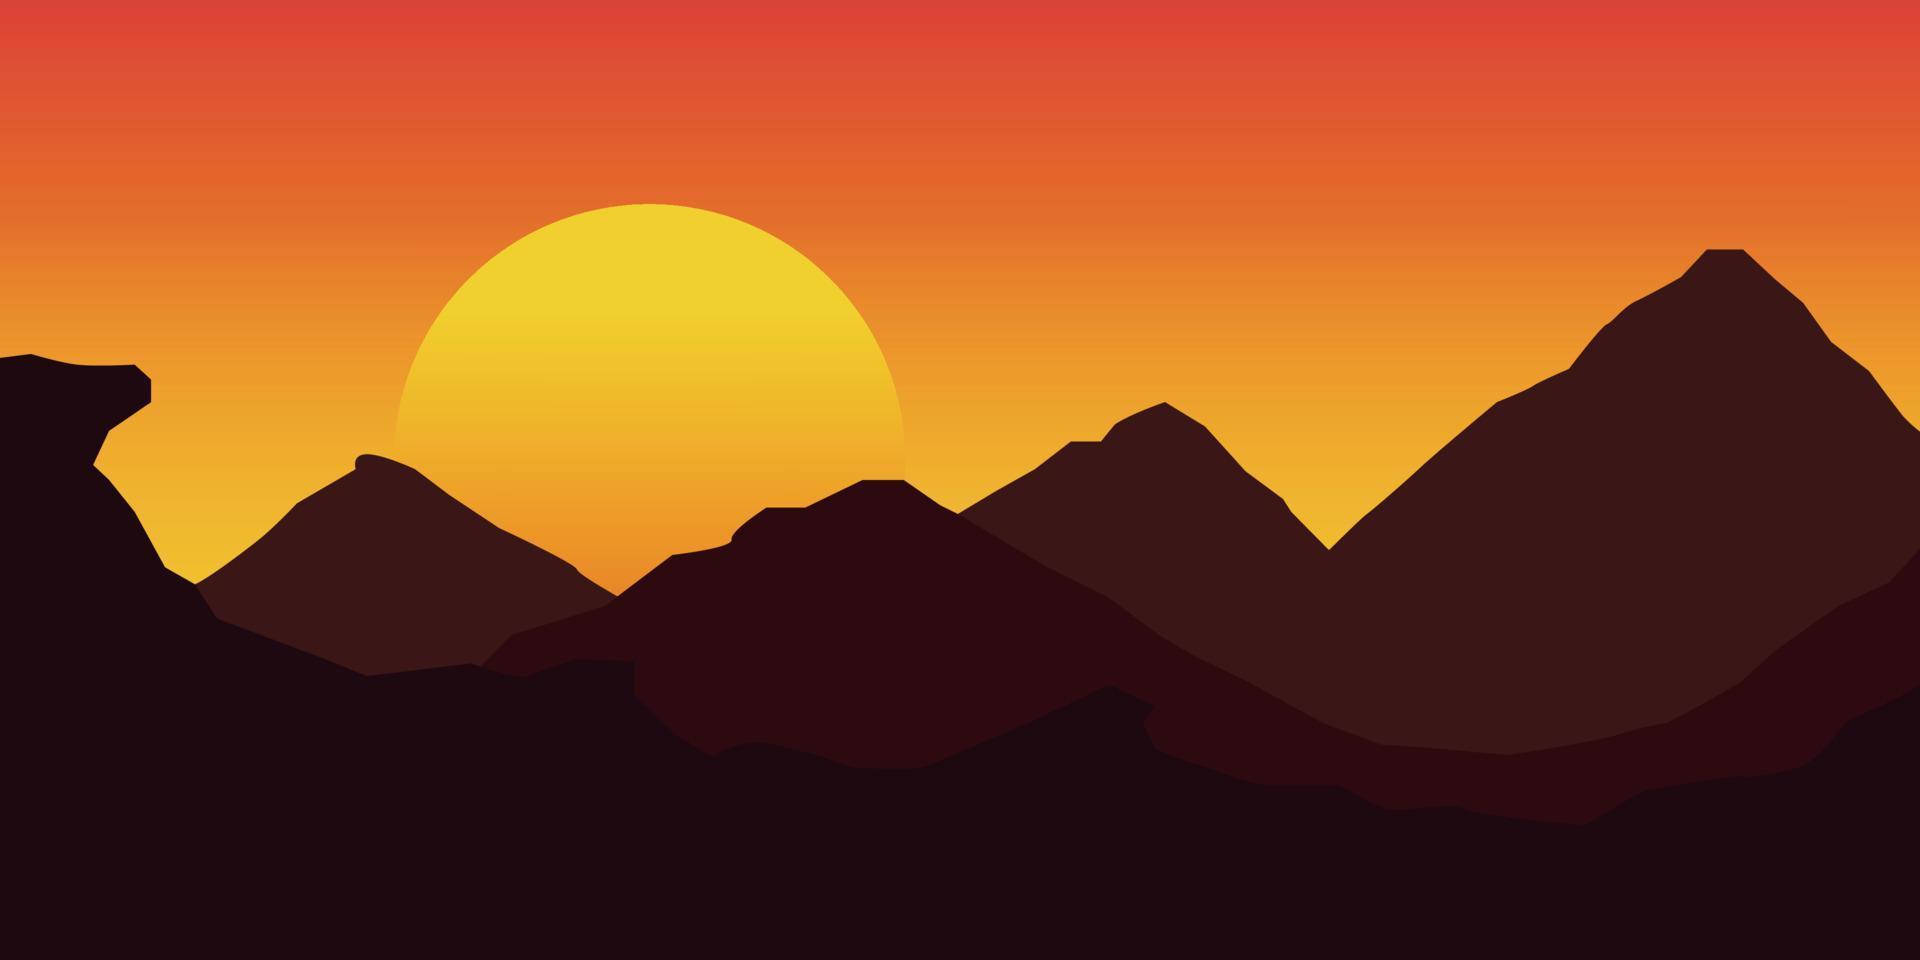 Sunset flat mountains background vector